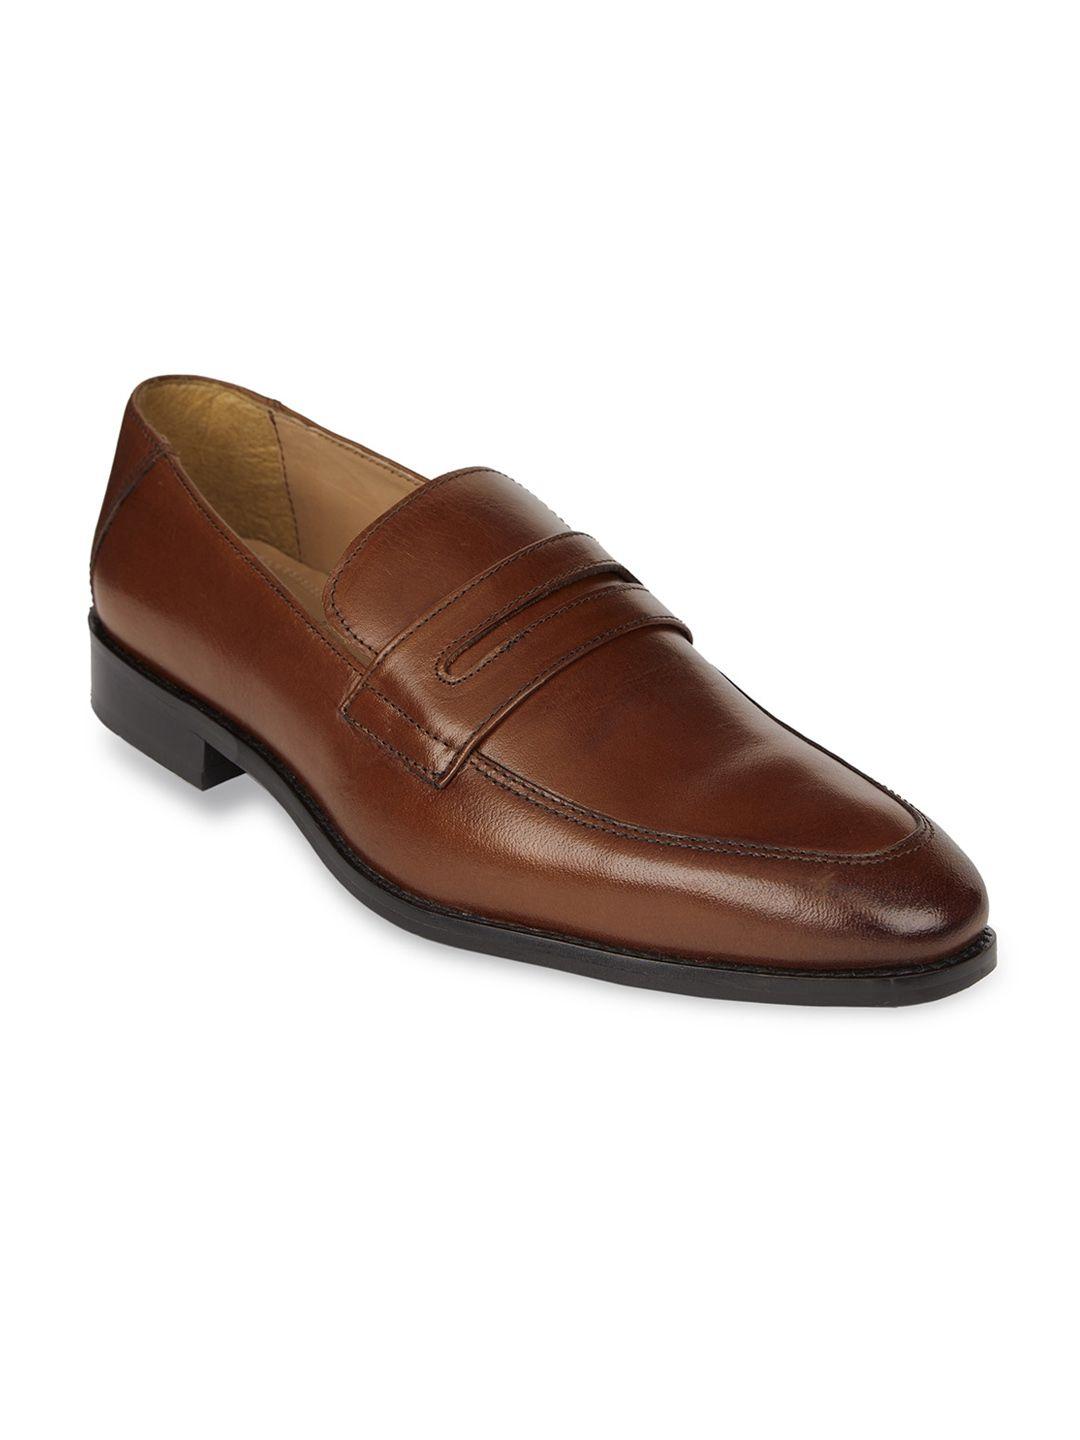 hats off accessories men leather penny loafers